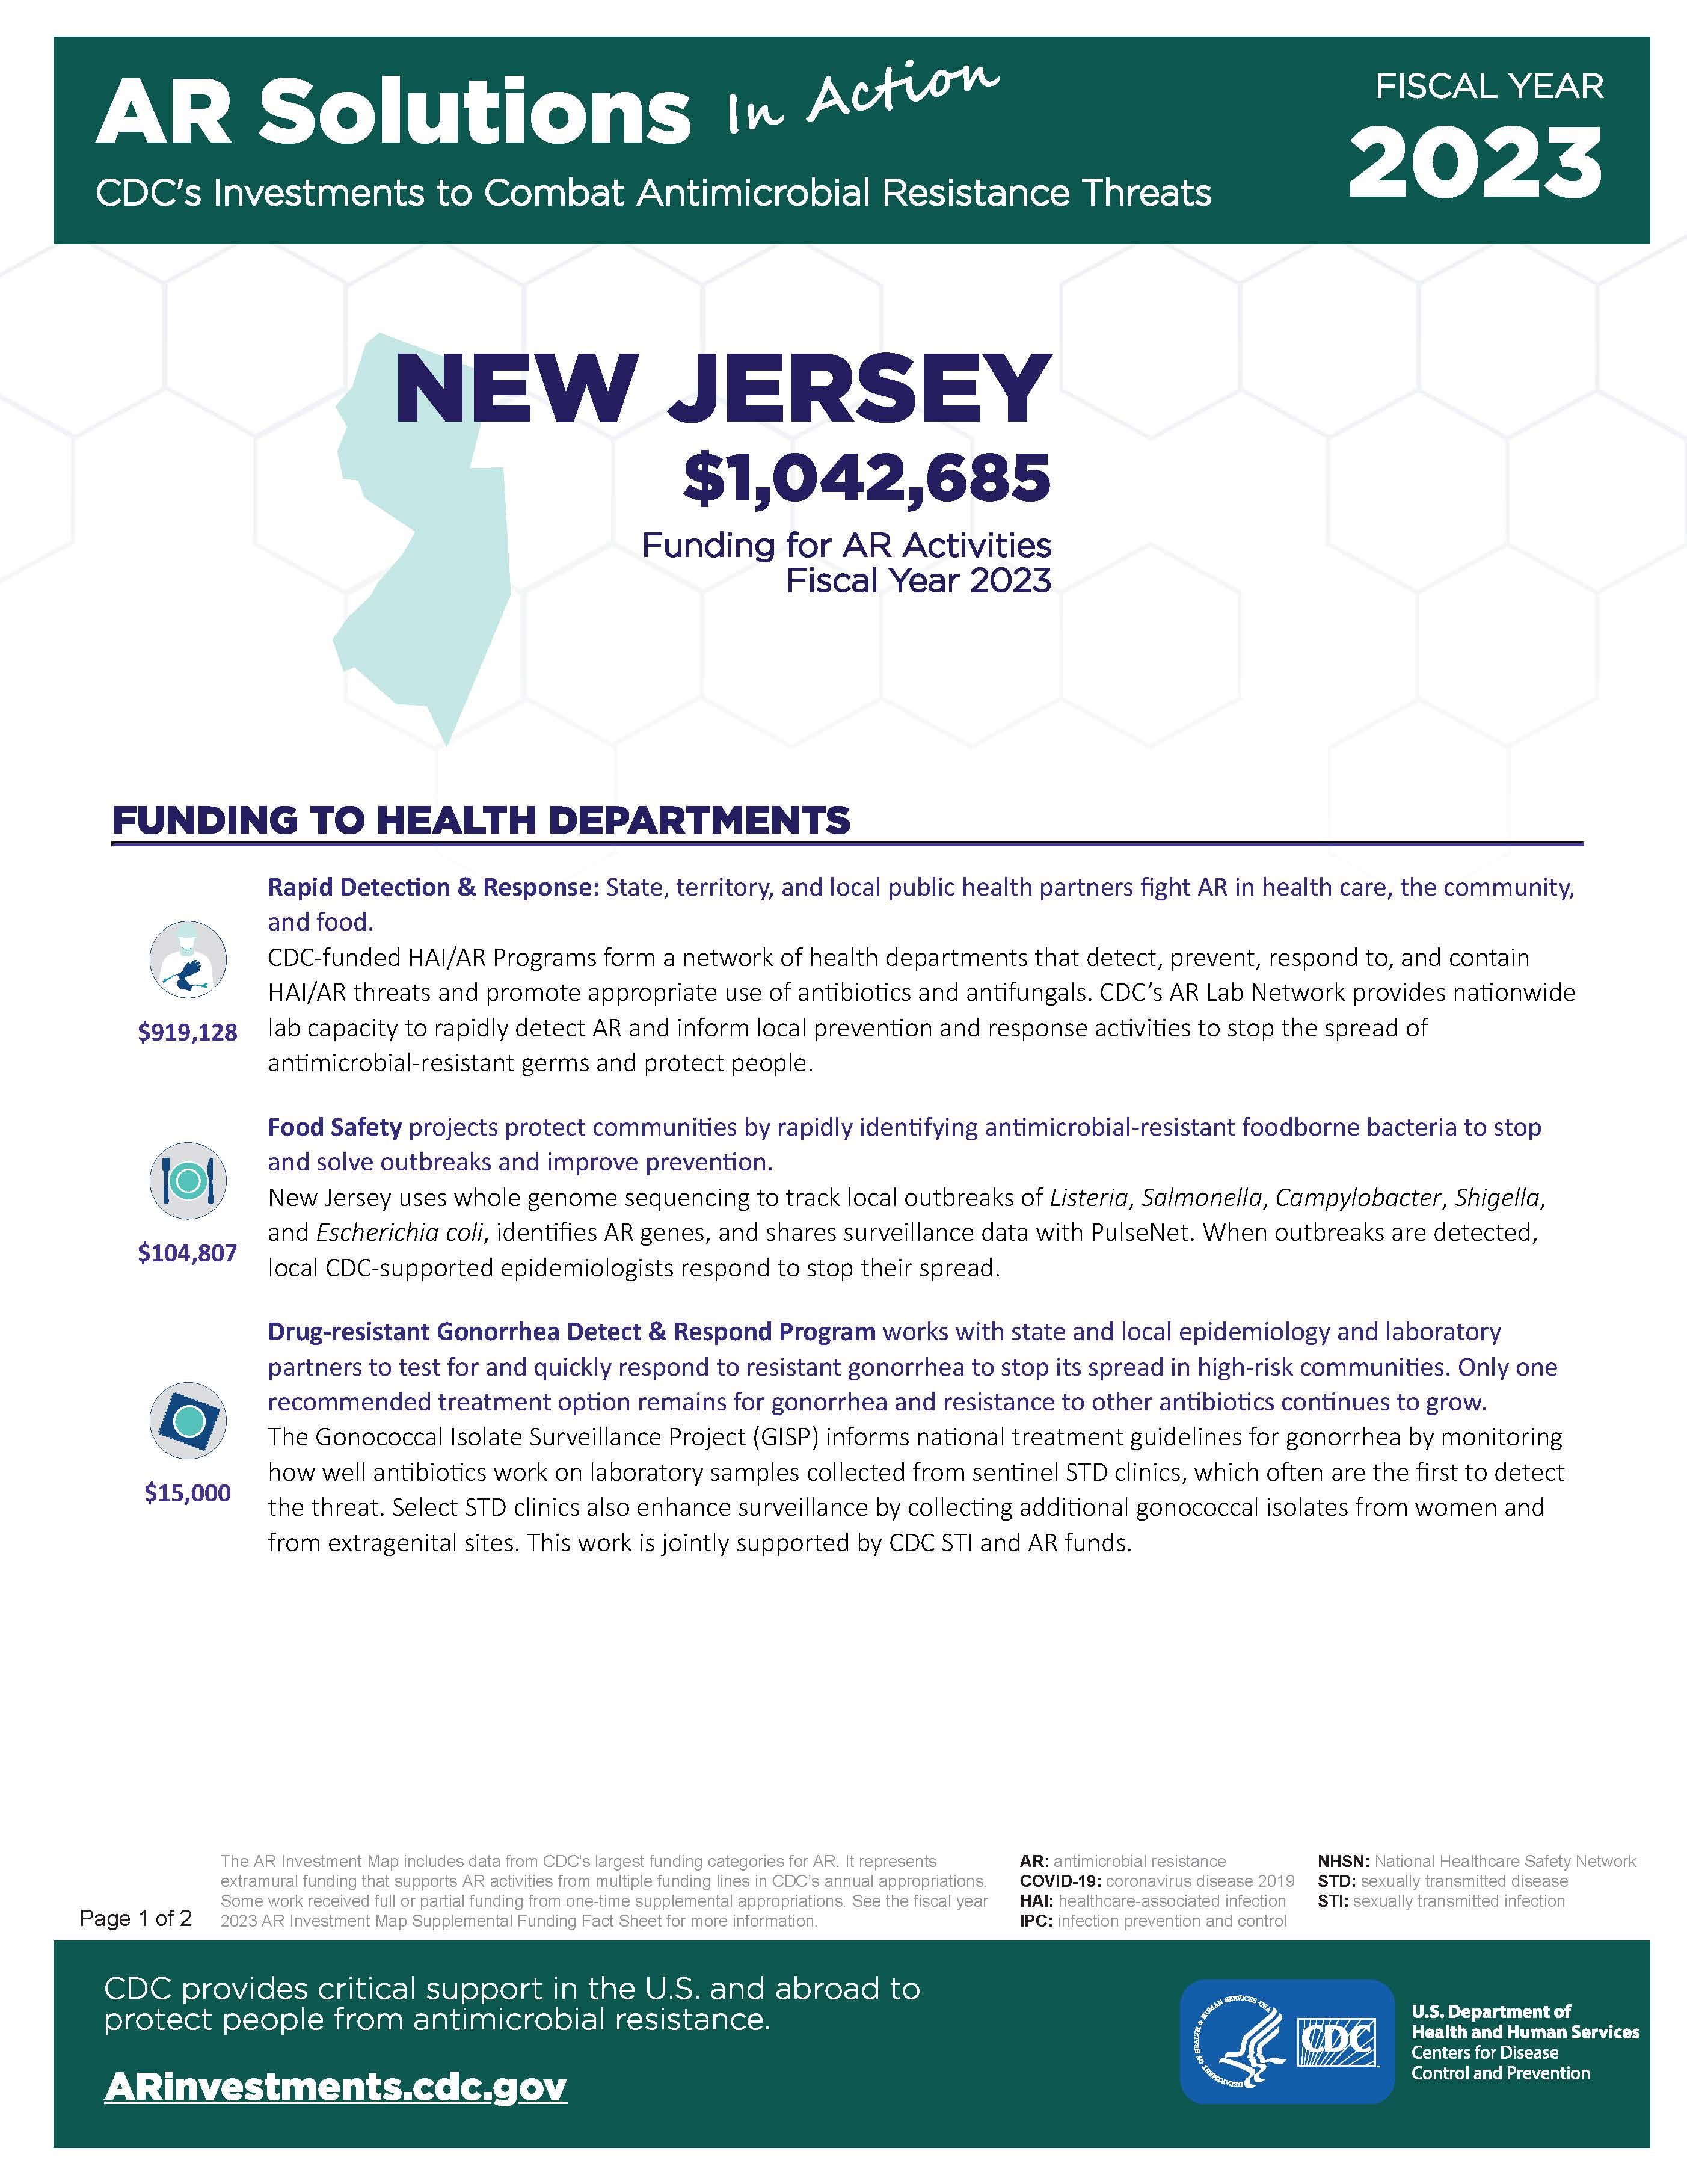 View Factsheet for New Jersey